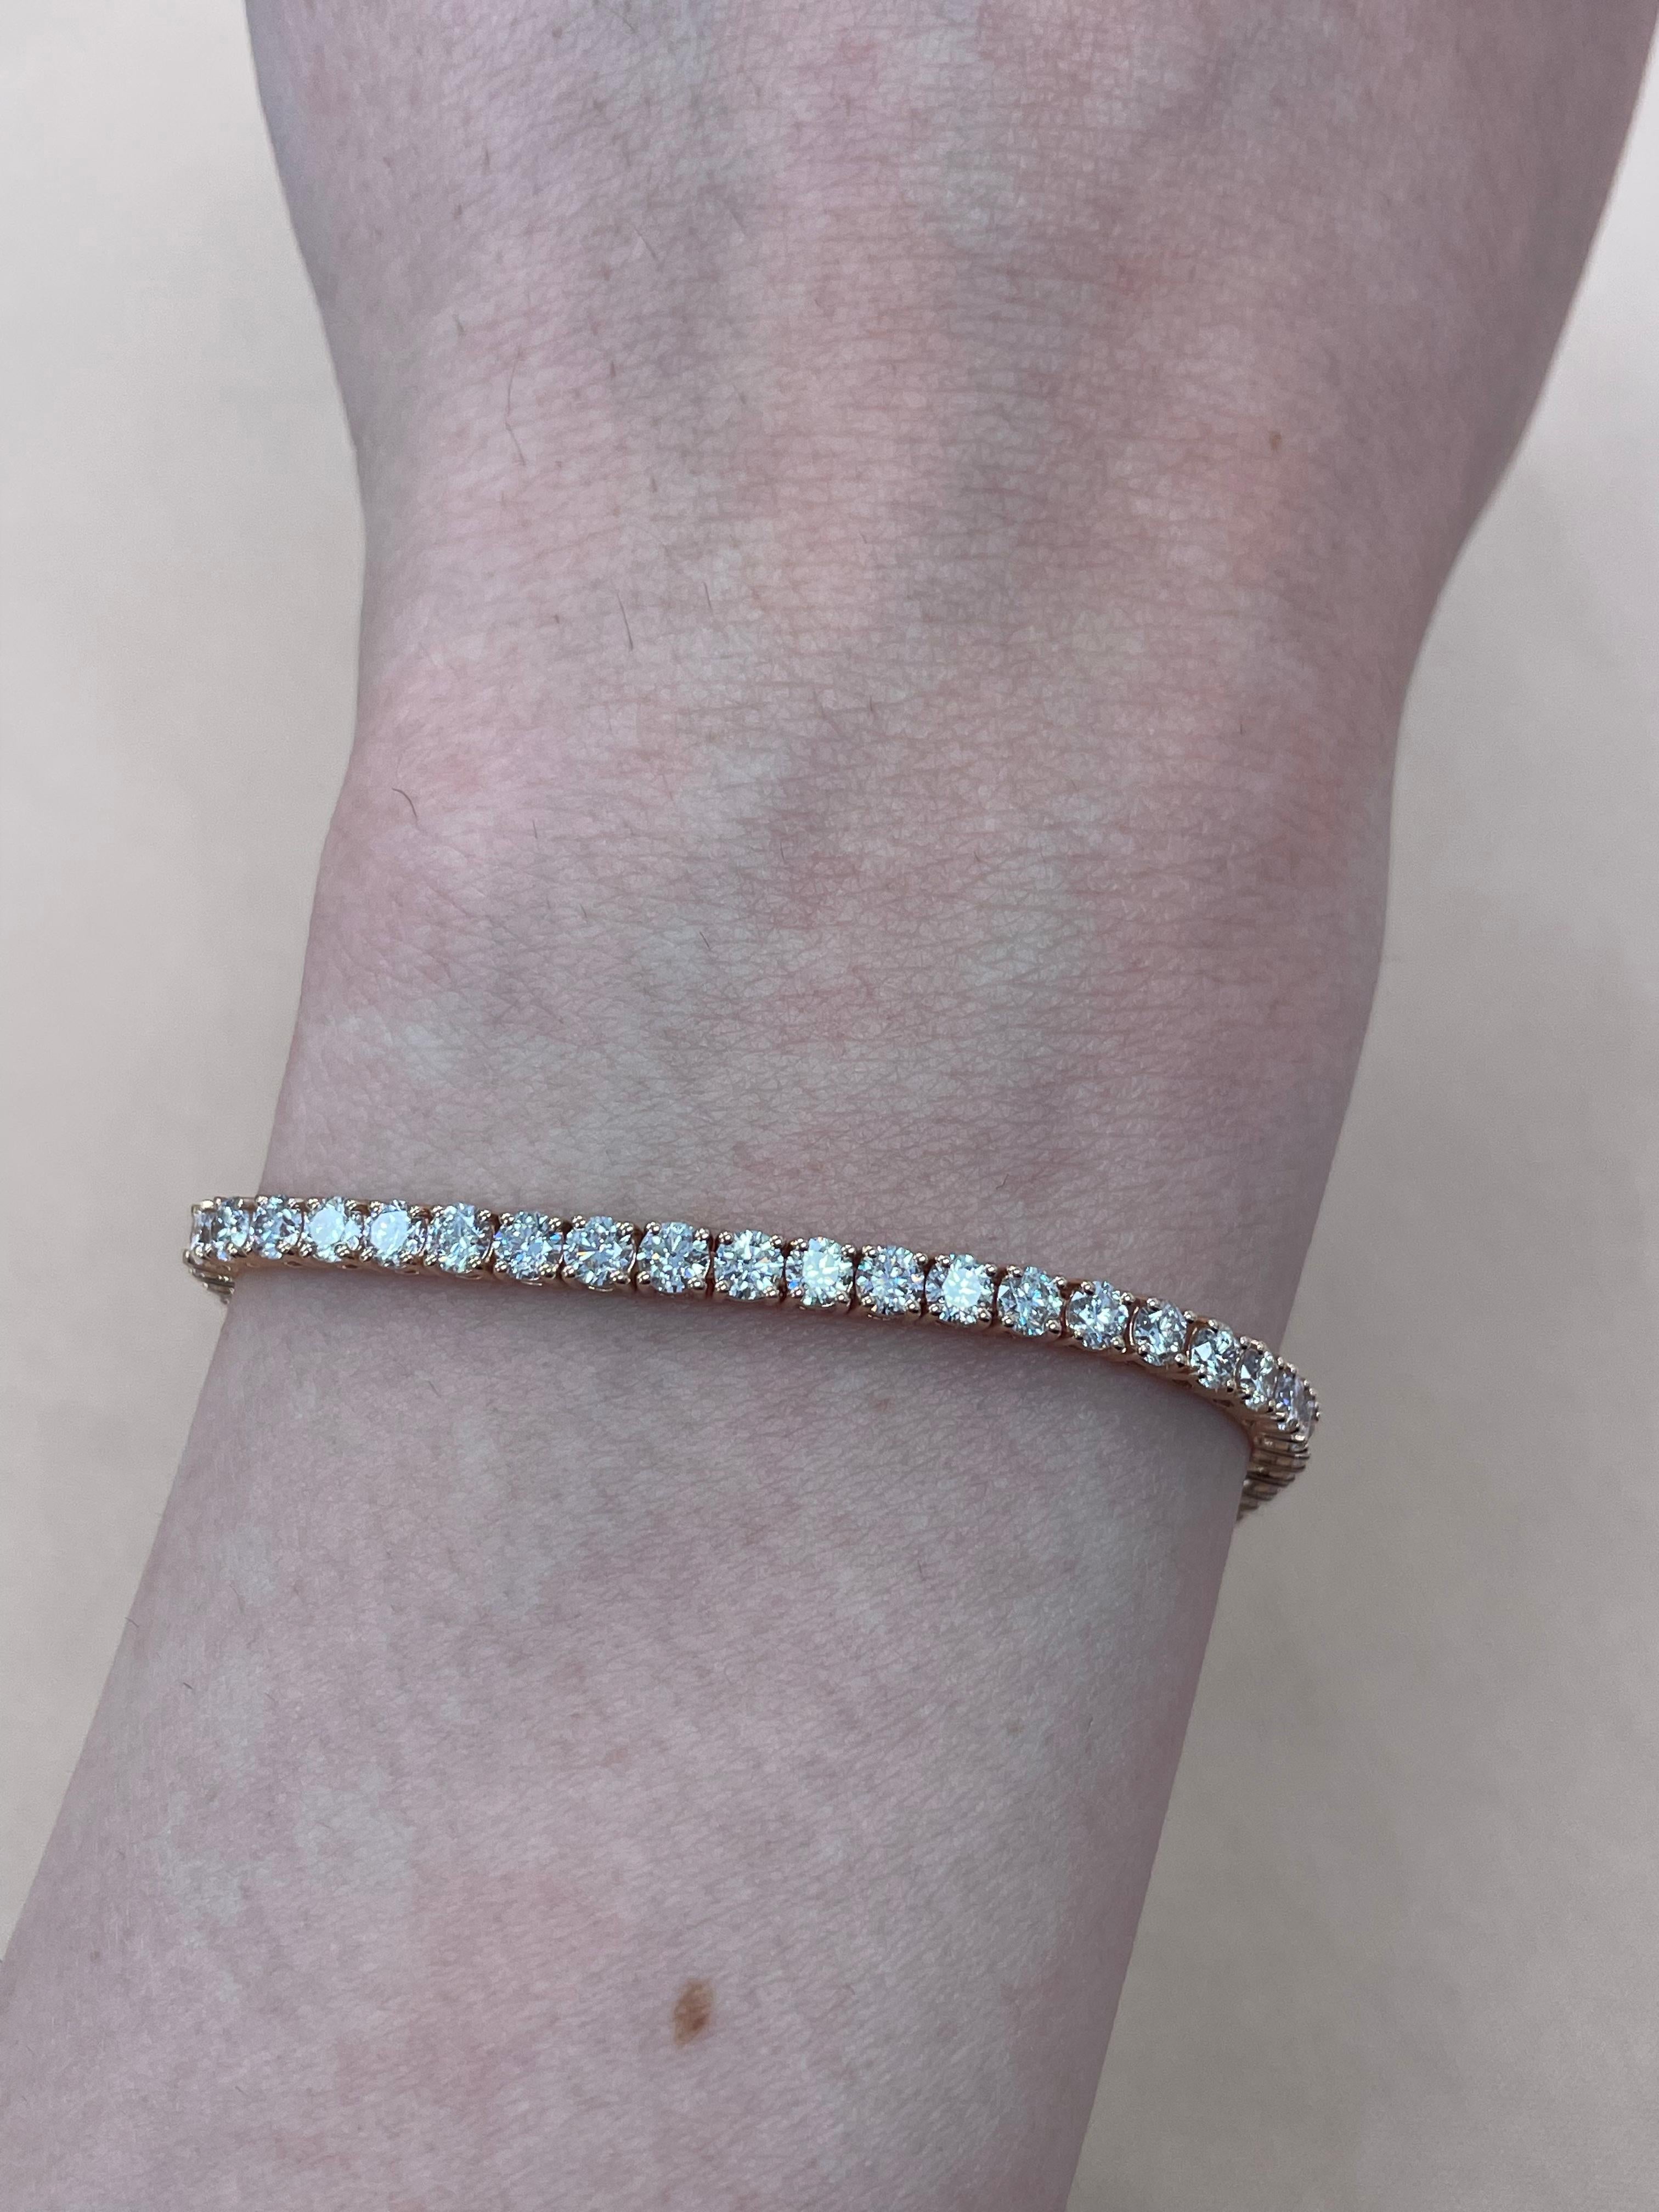 Exquisite and timeless diamonds tennis bracelet, by Alexander Beverly Hills.
59 round brilliant diamonds, 5.61 carats total. Approximately Very Light Pink color (looks like regular white diamonds in mounting) and VS2/SI1 clarity. Four prong set in